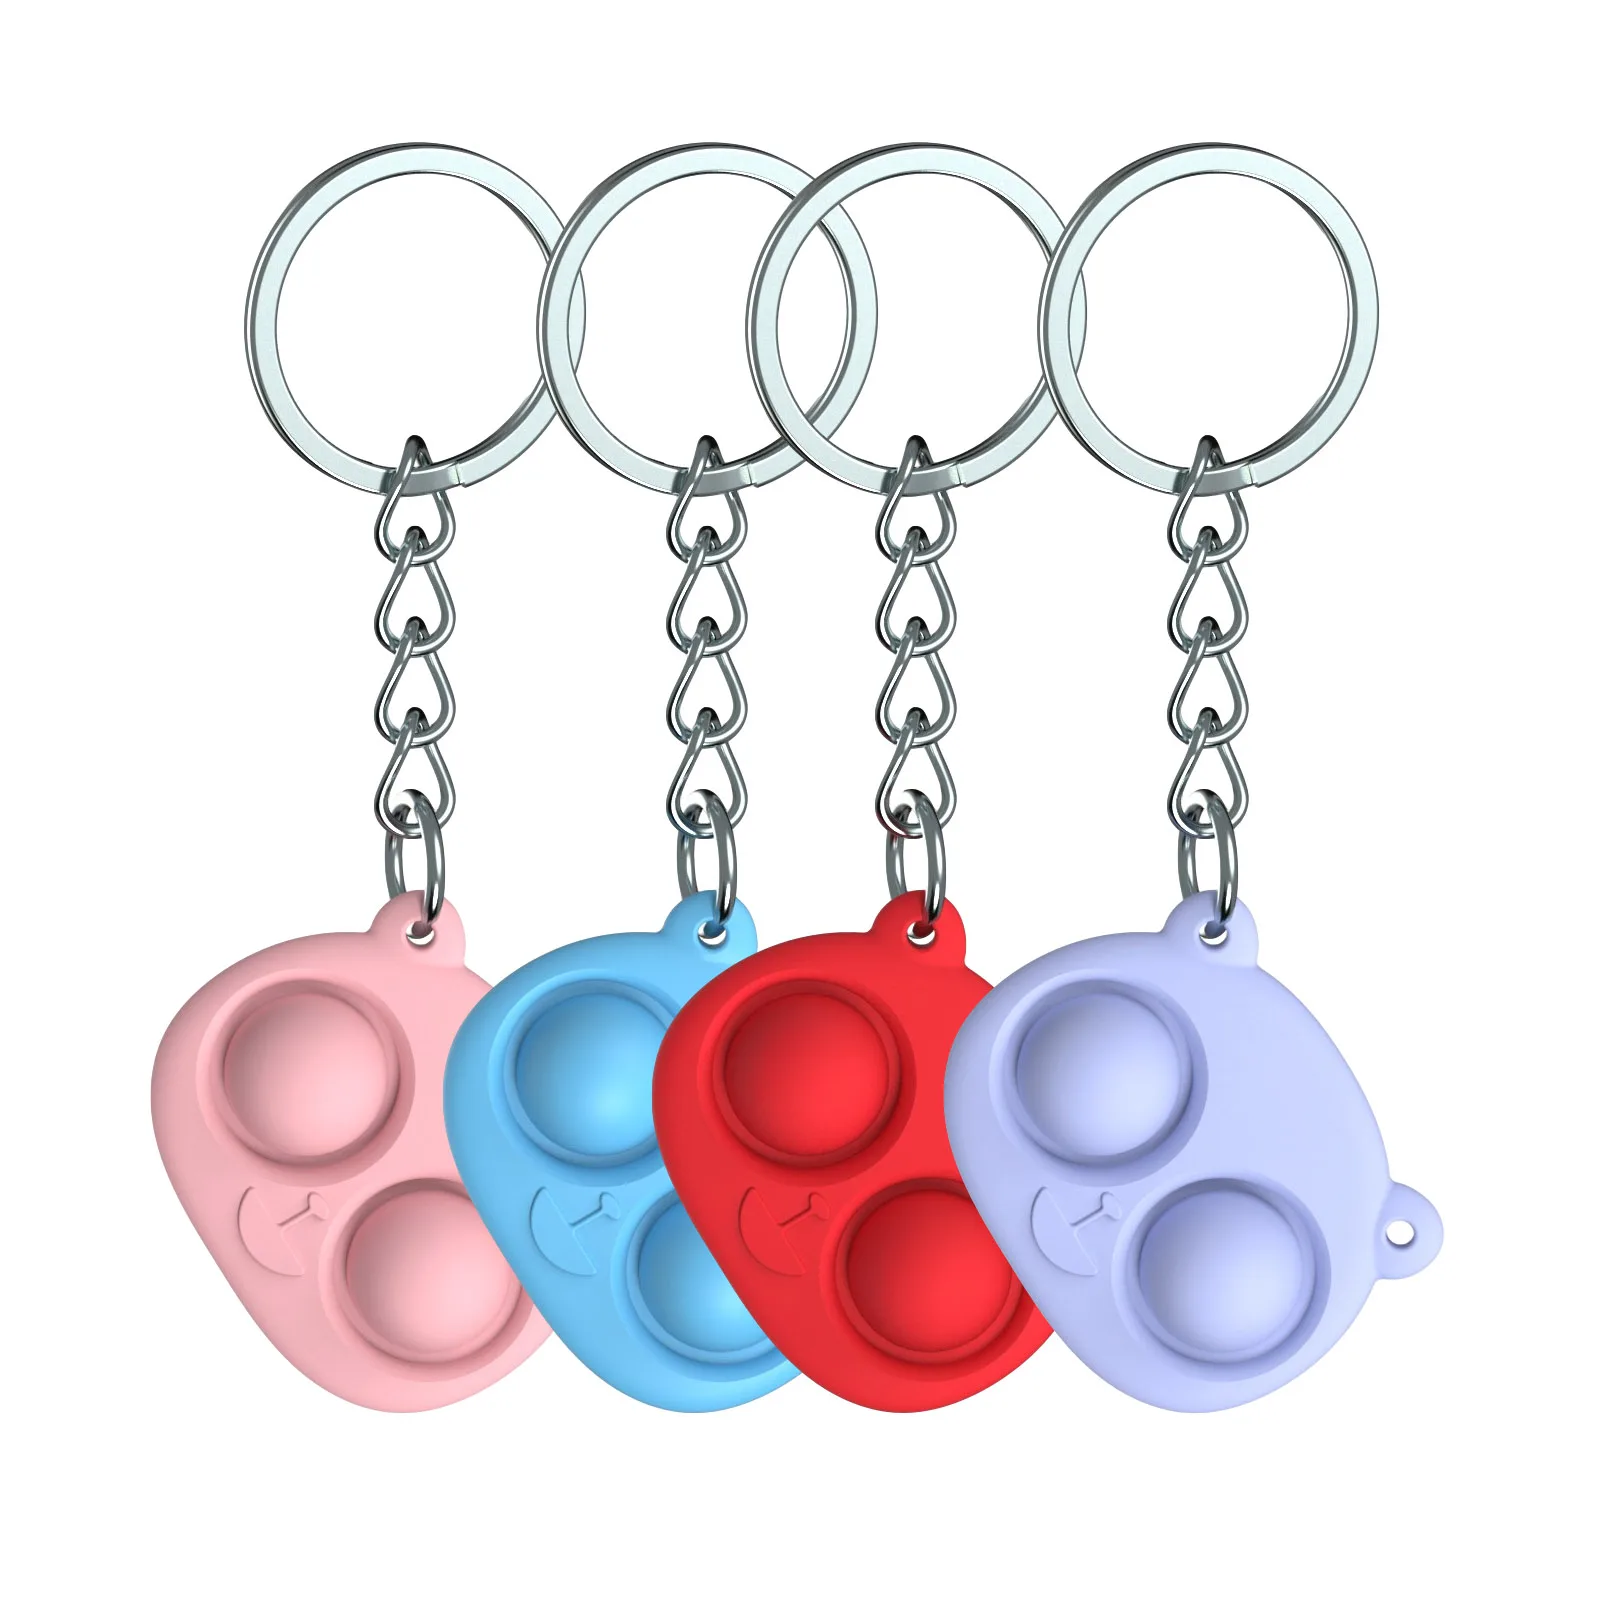 

1PC Novelty Simple Dimple Fidget Toy Safe Silicone Flip Stress Relief Sensory Toy Keychain Kids Adults Decompresssion Toys Gift